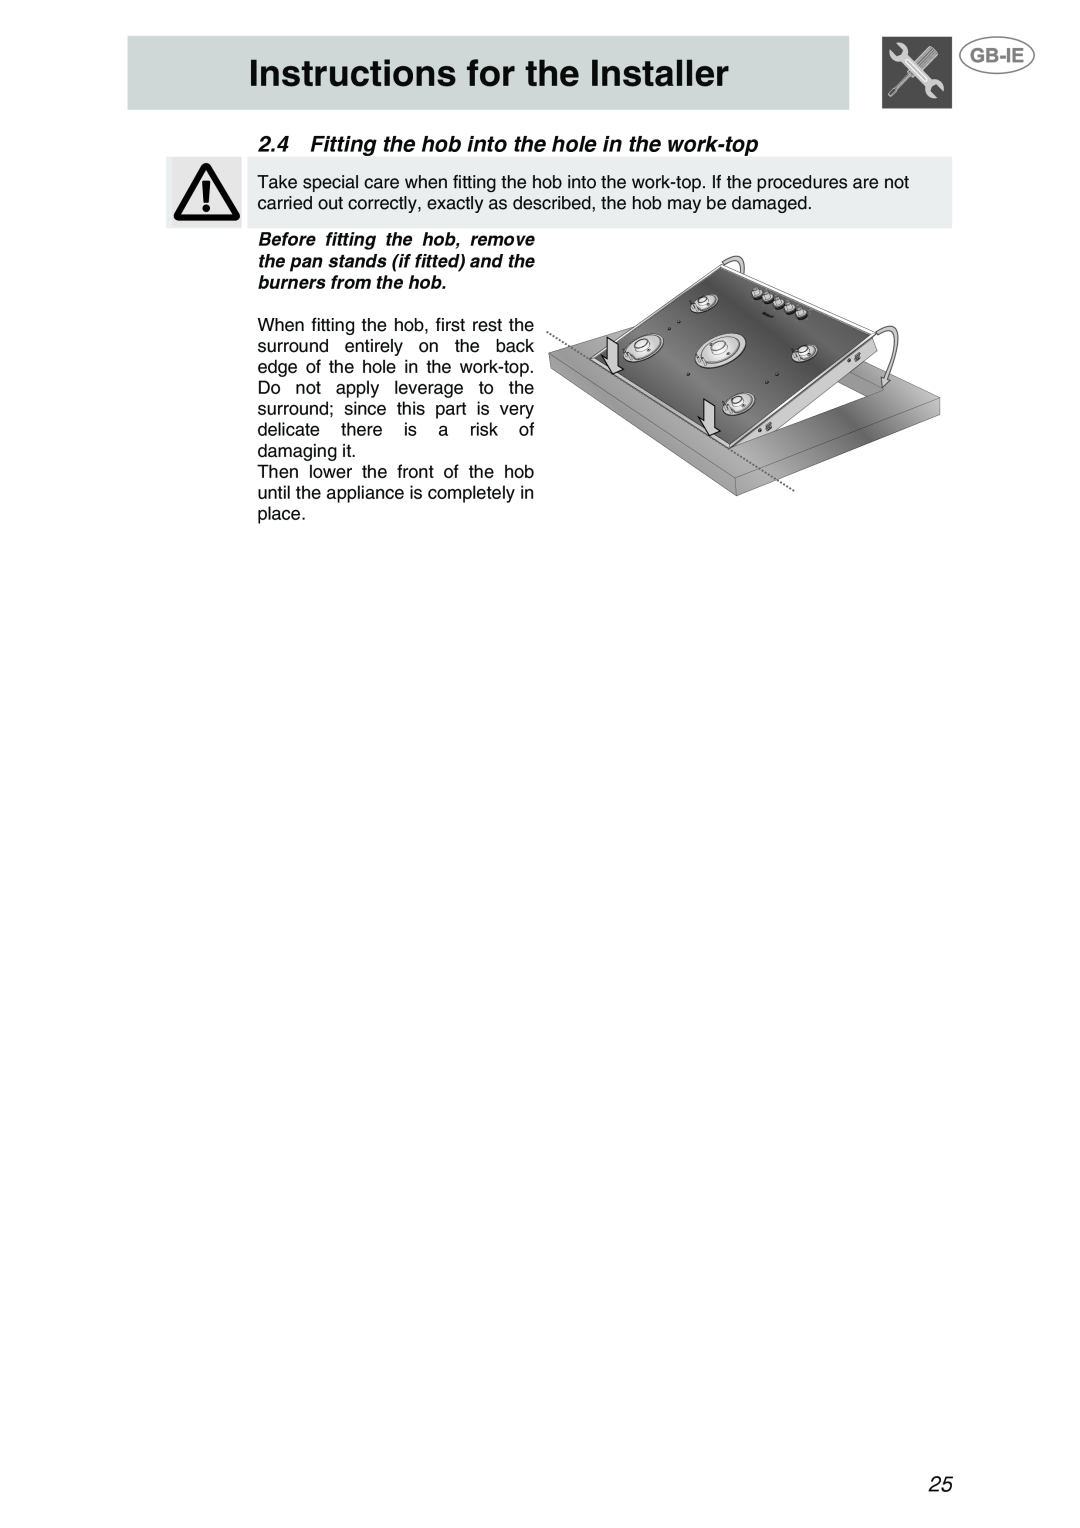 Smeg PVA750NL, PVA750BE, PVA750D manual Instructions for the Installer, Fitting the hob into the hole in the work-top 